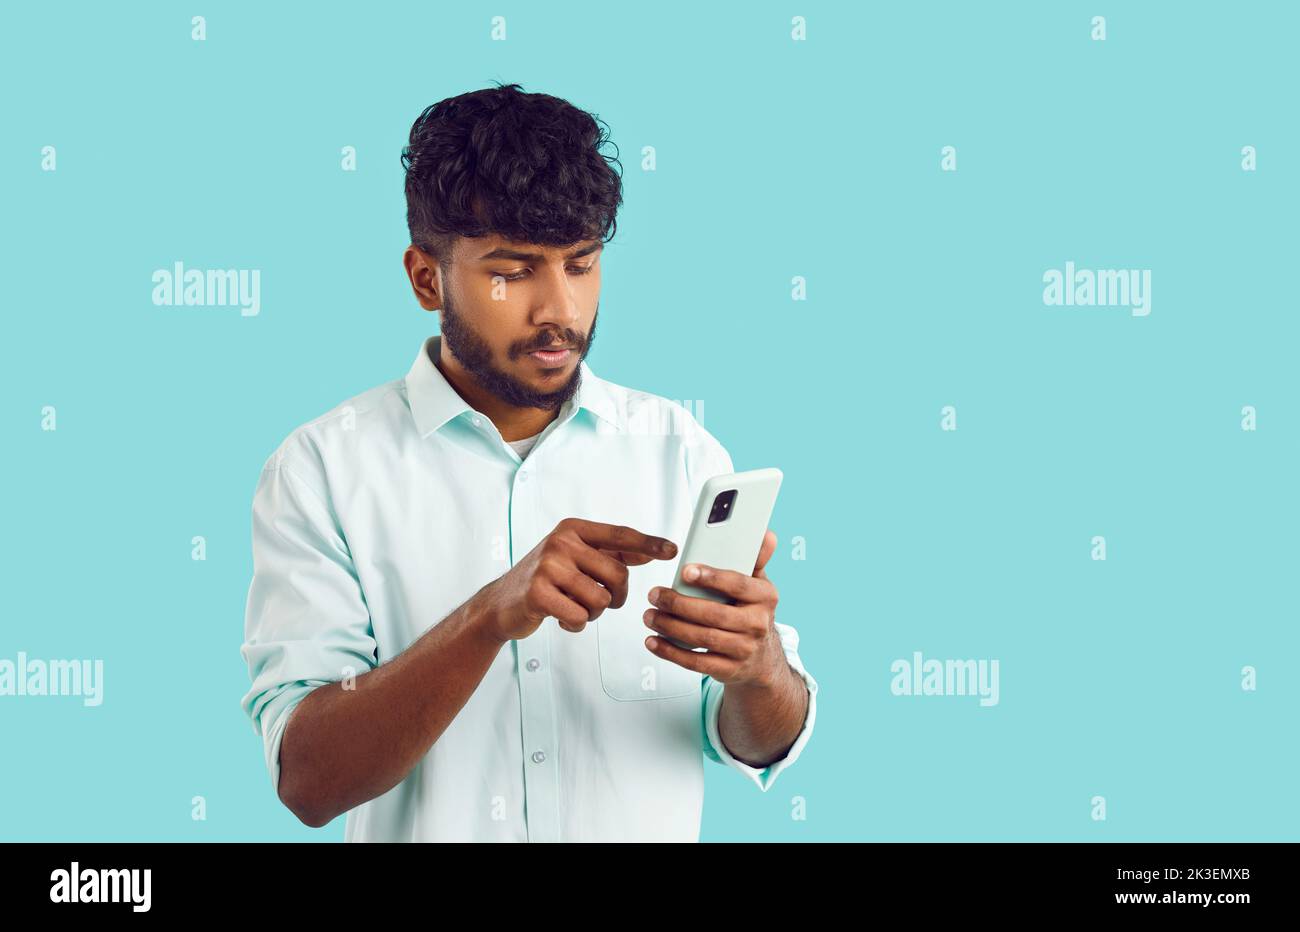 Young focused Indian man holding mobile phone reading latest news stands on turquoise background Stock Photo